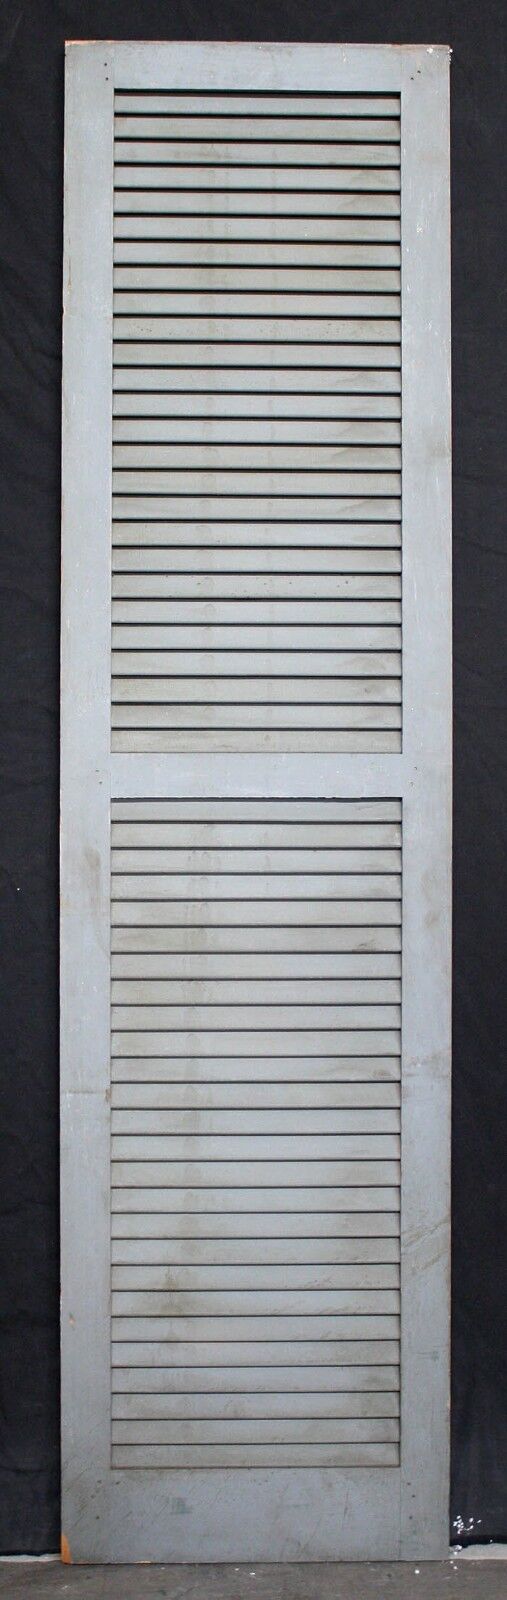 17.5"x68" Vintage Antique Old Reclaimed Salvaged Wood Wooden Window Shutter Cabinet Pantry Louver Door